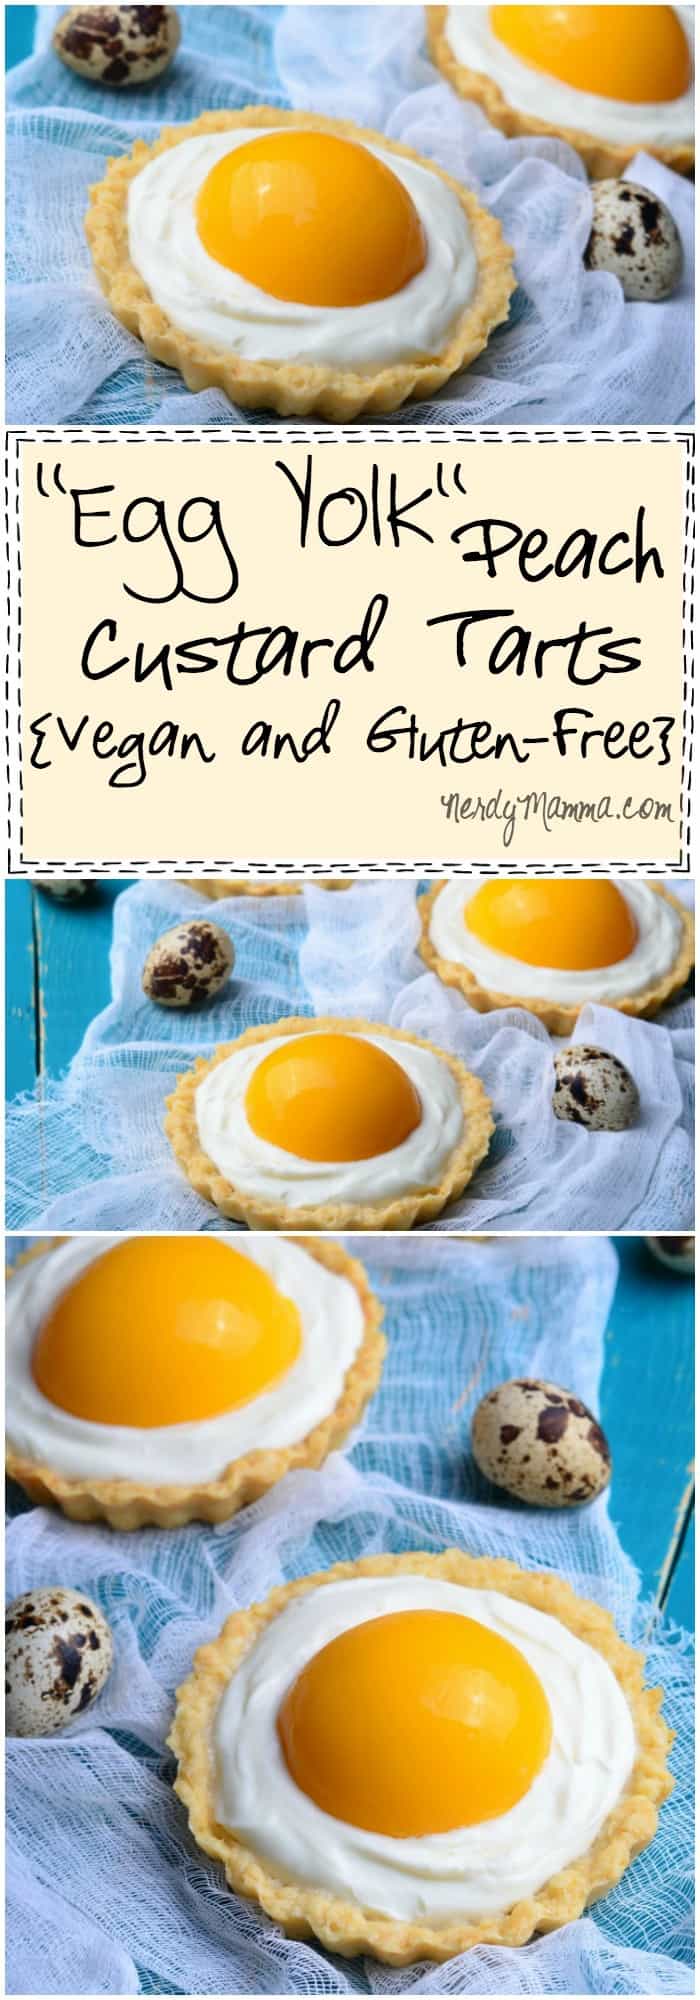 This is a HILARIOUS dessert for the Easter table. I mean, Egg Yolk Peach Custard Tarts that have no egg, no dairy and are totally gluten-free. LOL!